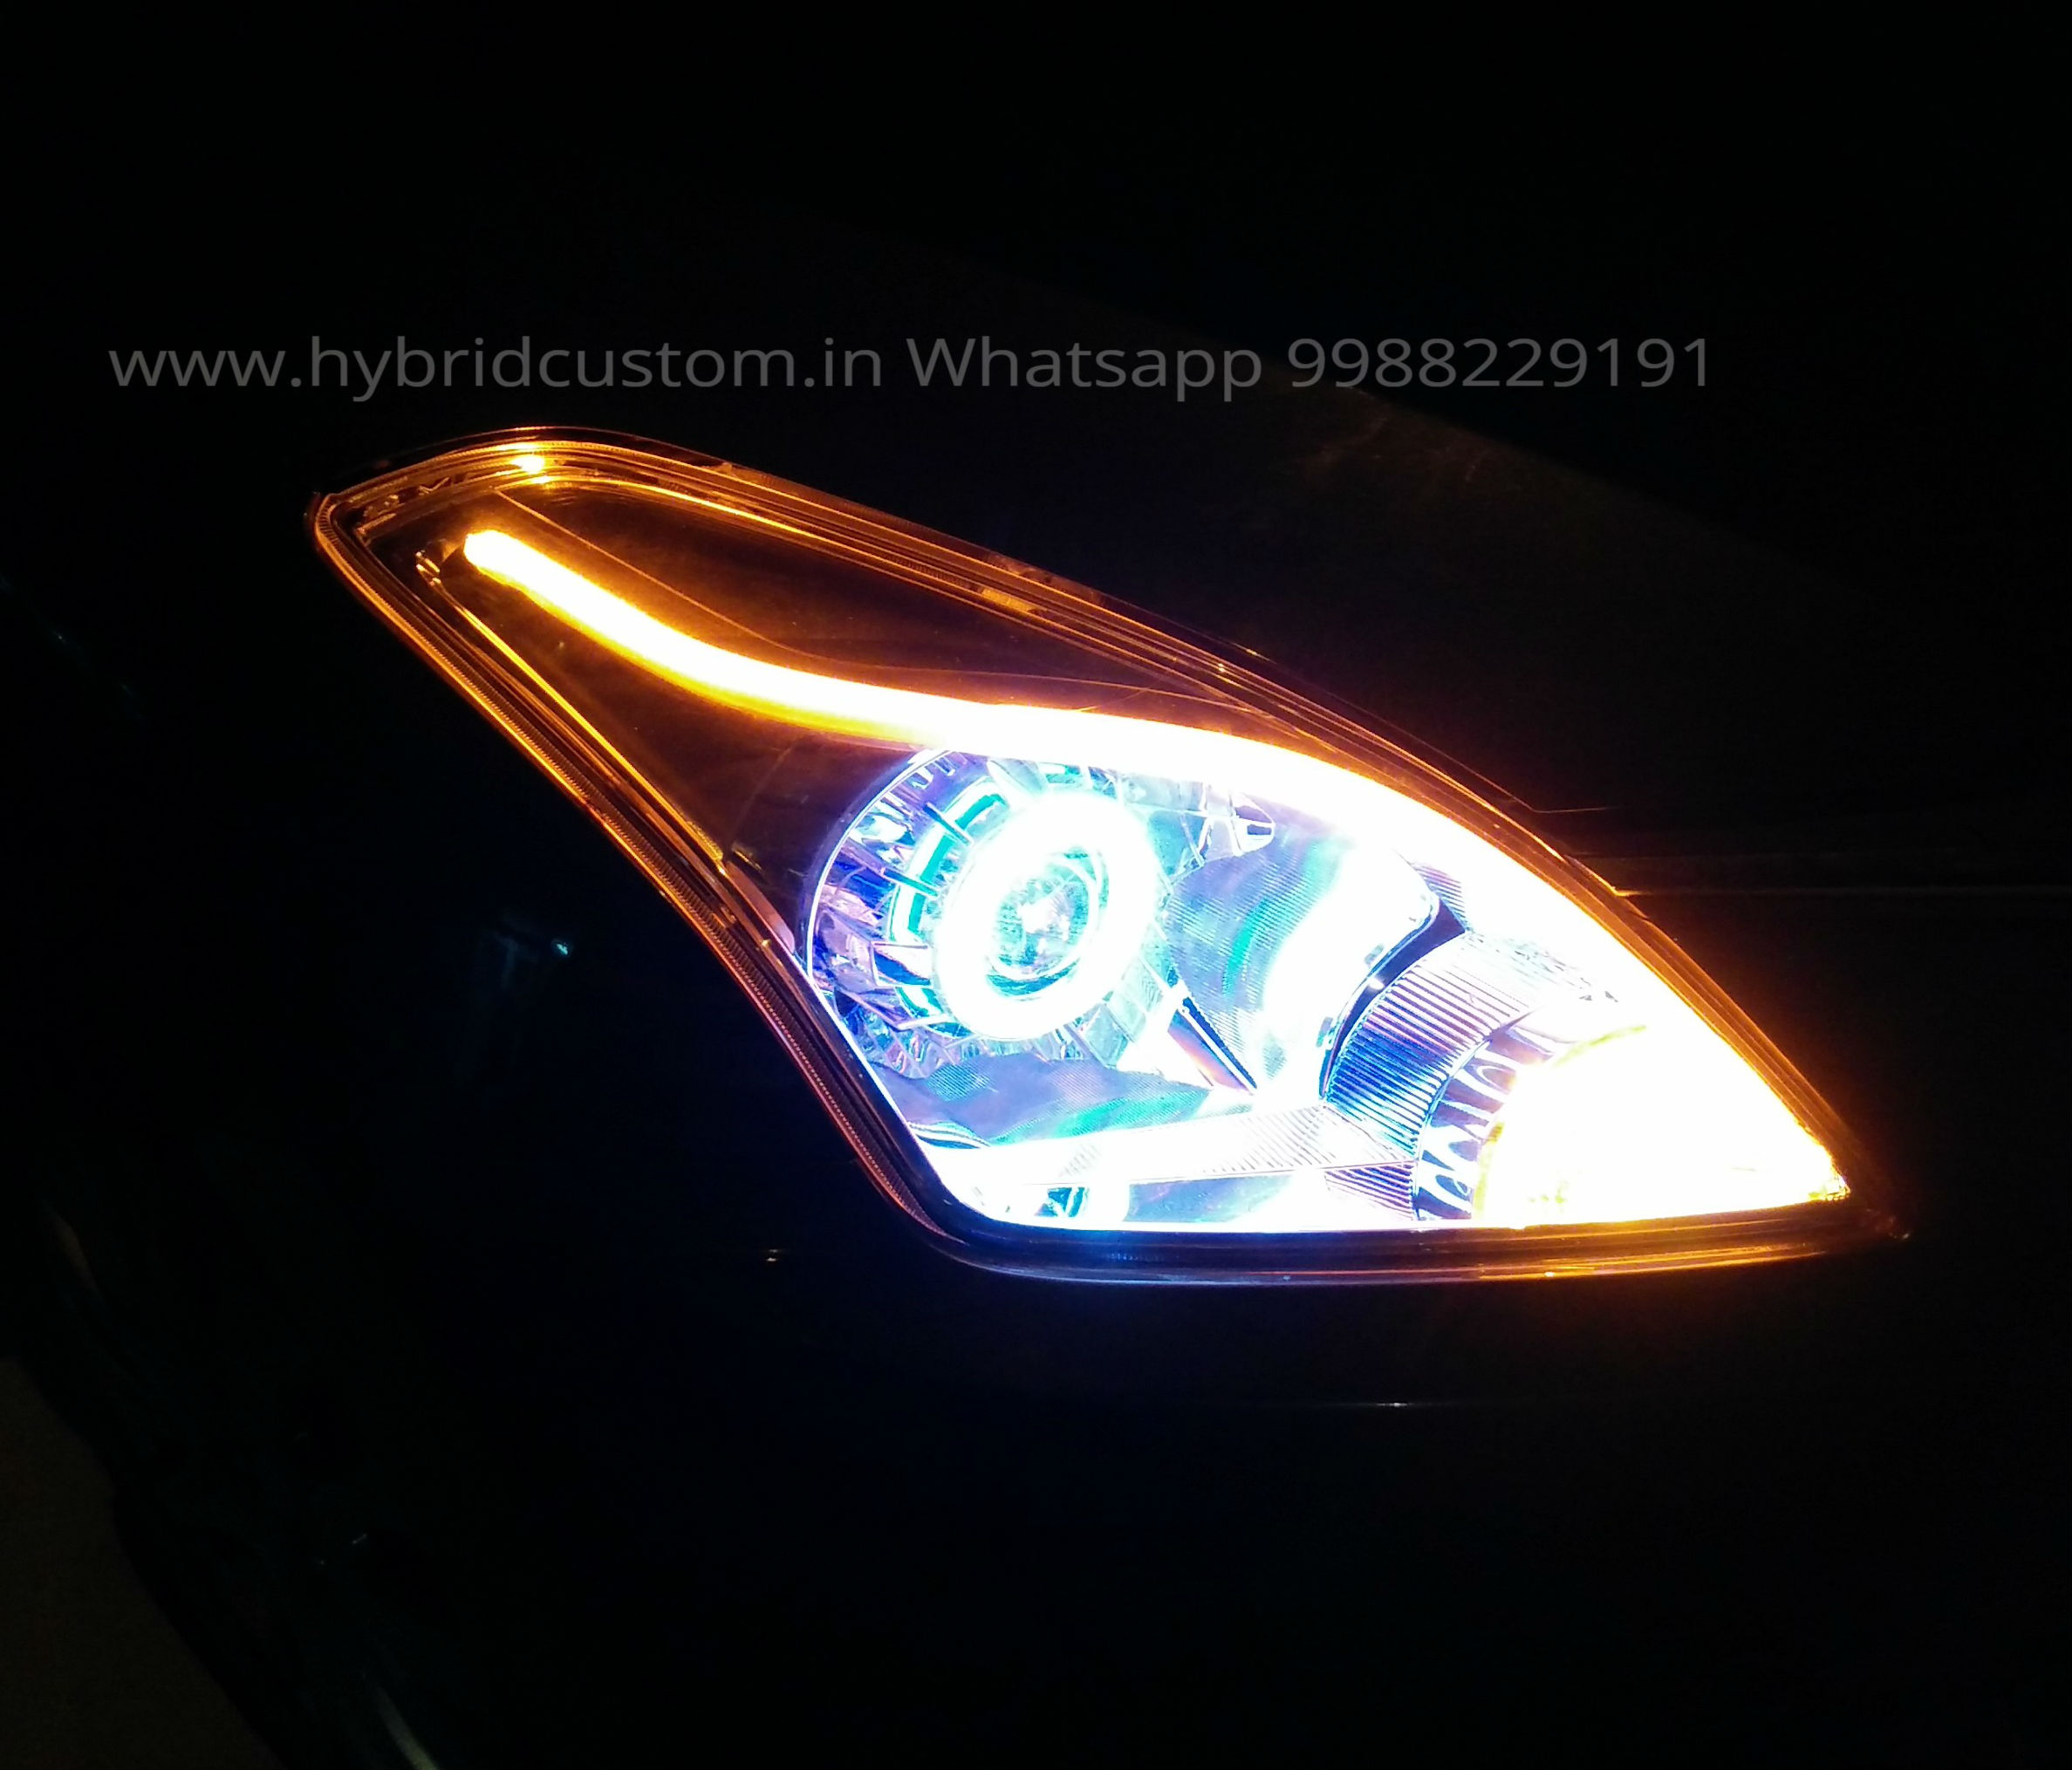 projector headlights for cars